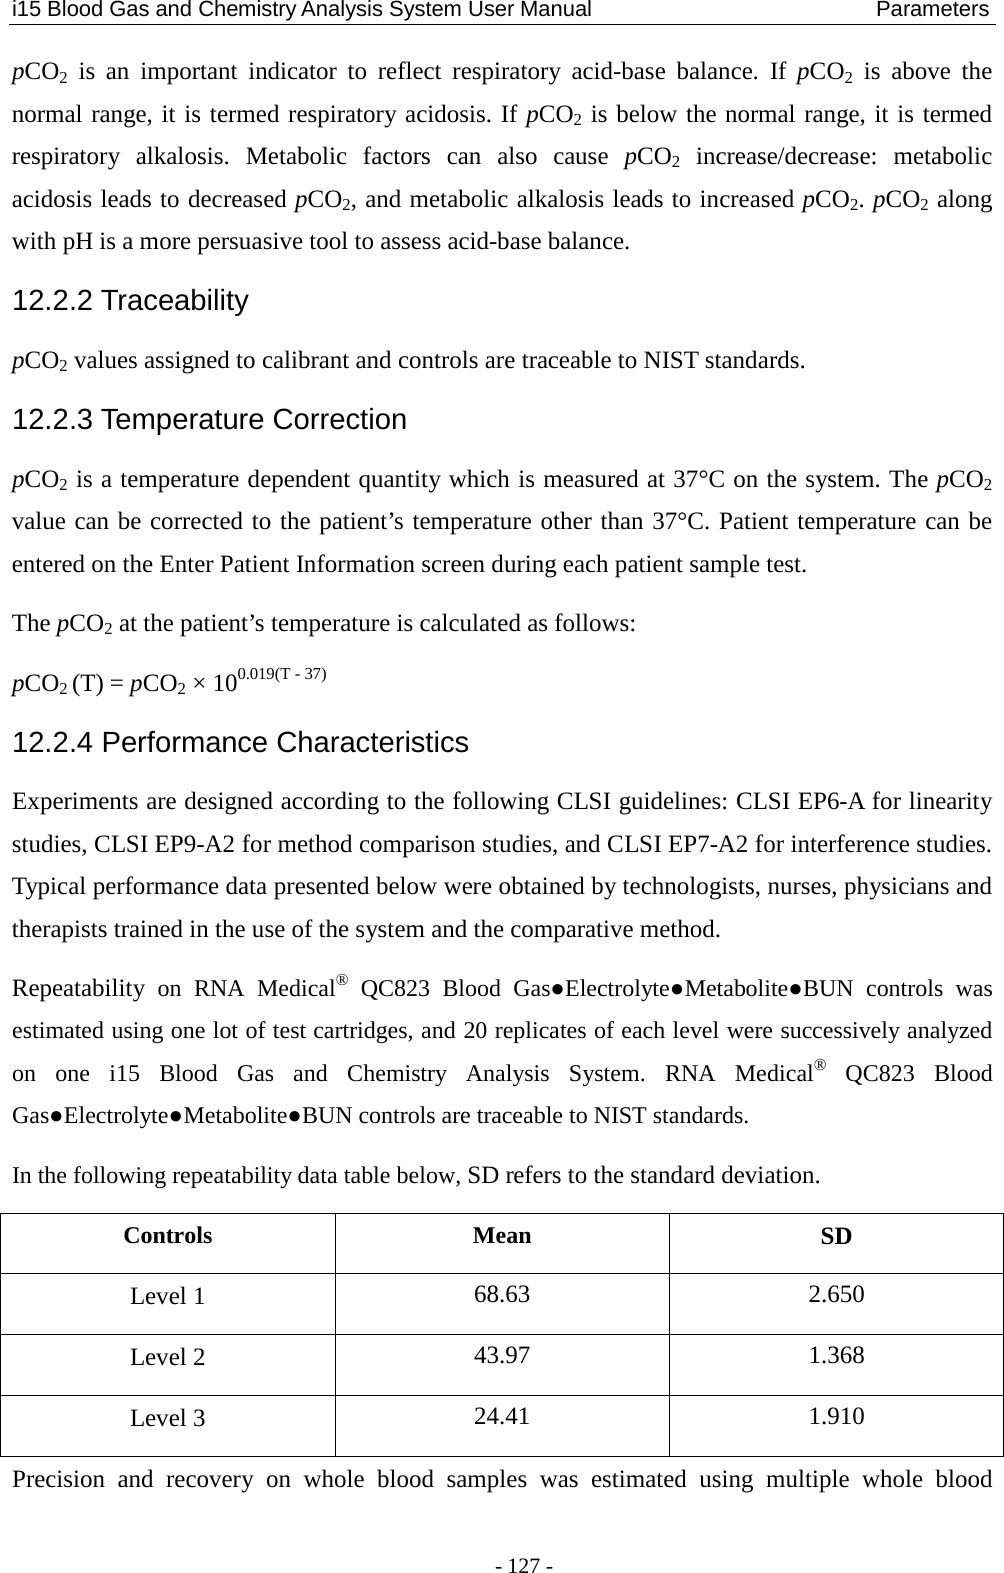 i15 Blood Gas and Chemistry Analysis System User Manual                            Parameters - 127 - pCO2 is an important indicator to reflect respiratory acid-base balance. If  pCO2 is above the normal range, it is termed respiratory acidosis. If pCO2 is below the normal range, it is termed respiratory alkalosis. Metabolic factors can also cause  pCO2 increase/decrease:  metabolic acidosis leads to decreased pCO2, and metabolic alkalosis leads to increased pCO2. pCO2 along with pH is a more persuasive tool to assess acid-base balance. 12.2.2 Traceability pCO2 values assigned to calibrant and controls are traceable to NIST standards. 12.2.3 Temperature Correction pCO2 is a temperature dependent quantity which is measured at 37°C on the system. The pCO2 value can be corrected to the patient’s temperature other than 37°C. Patient temperature can be entered on the Enter Patient Information screen during each patient sample test. The pCO2 at the patient’s temperature is calculated as follows: pCO2 (T) = pCO2 × 100.019(T - 37) 12.2.4 Performance Characteristics Experiments are designed according to the following CLSI guidelines: CLSI EP6-A for linearity studies, CLSI EP9-A2 for method comparison studies, and CLSI EP7-A2 for interference studies. Typical performance data presented below were obtained by technologists, nurses, physicians and therapists trained in the use of the system and the comparative method. Repeatability on RNA Medical® QC823 Blood Gas●Electrolyte●Metabolite●BUN  controls  was estimated using one lot of test cartridges, and 20 replicates of each level were successively analyzed on  one  i15 Blood Gas and Chemistry Analysis System. RNA Medical® QC823 Blood Gas●Electrolyte●Metabolite●BUN controls are traceable to NIST standards. In the following repeatability data table below, SD refers to the standard deviation. Controls  Mean SD Level 1 68.63  2.650 Level 2  43.97  1.368 Level 3 24.41  1.910 Precision and recovery on whole blood samples was estimated using multiple whole blood 